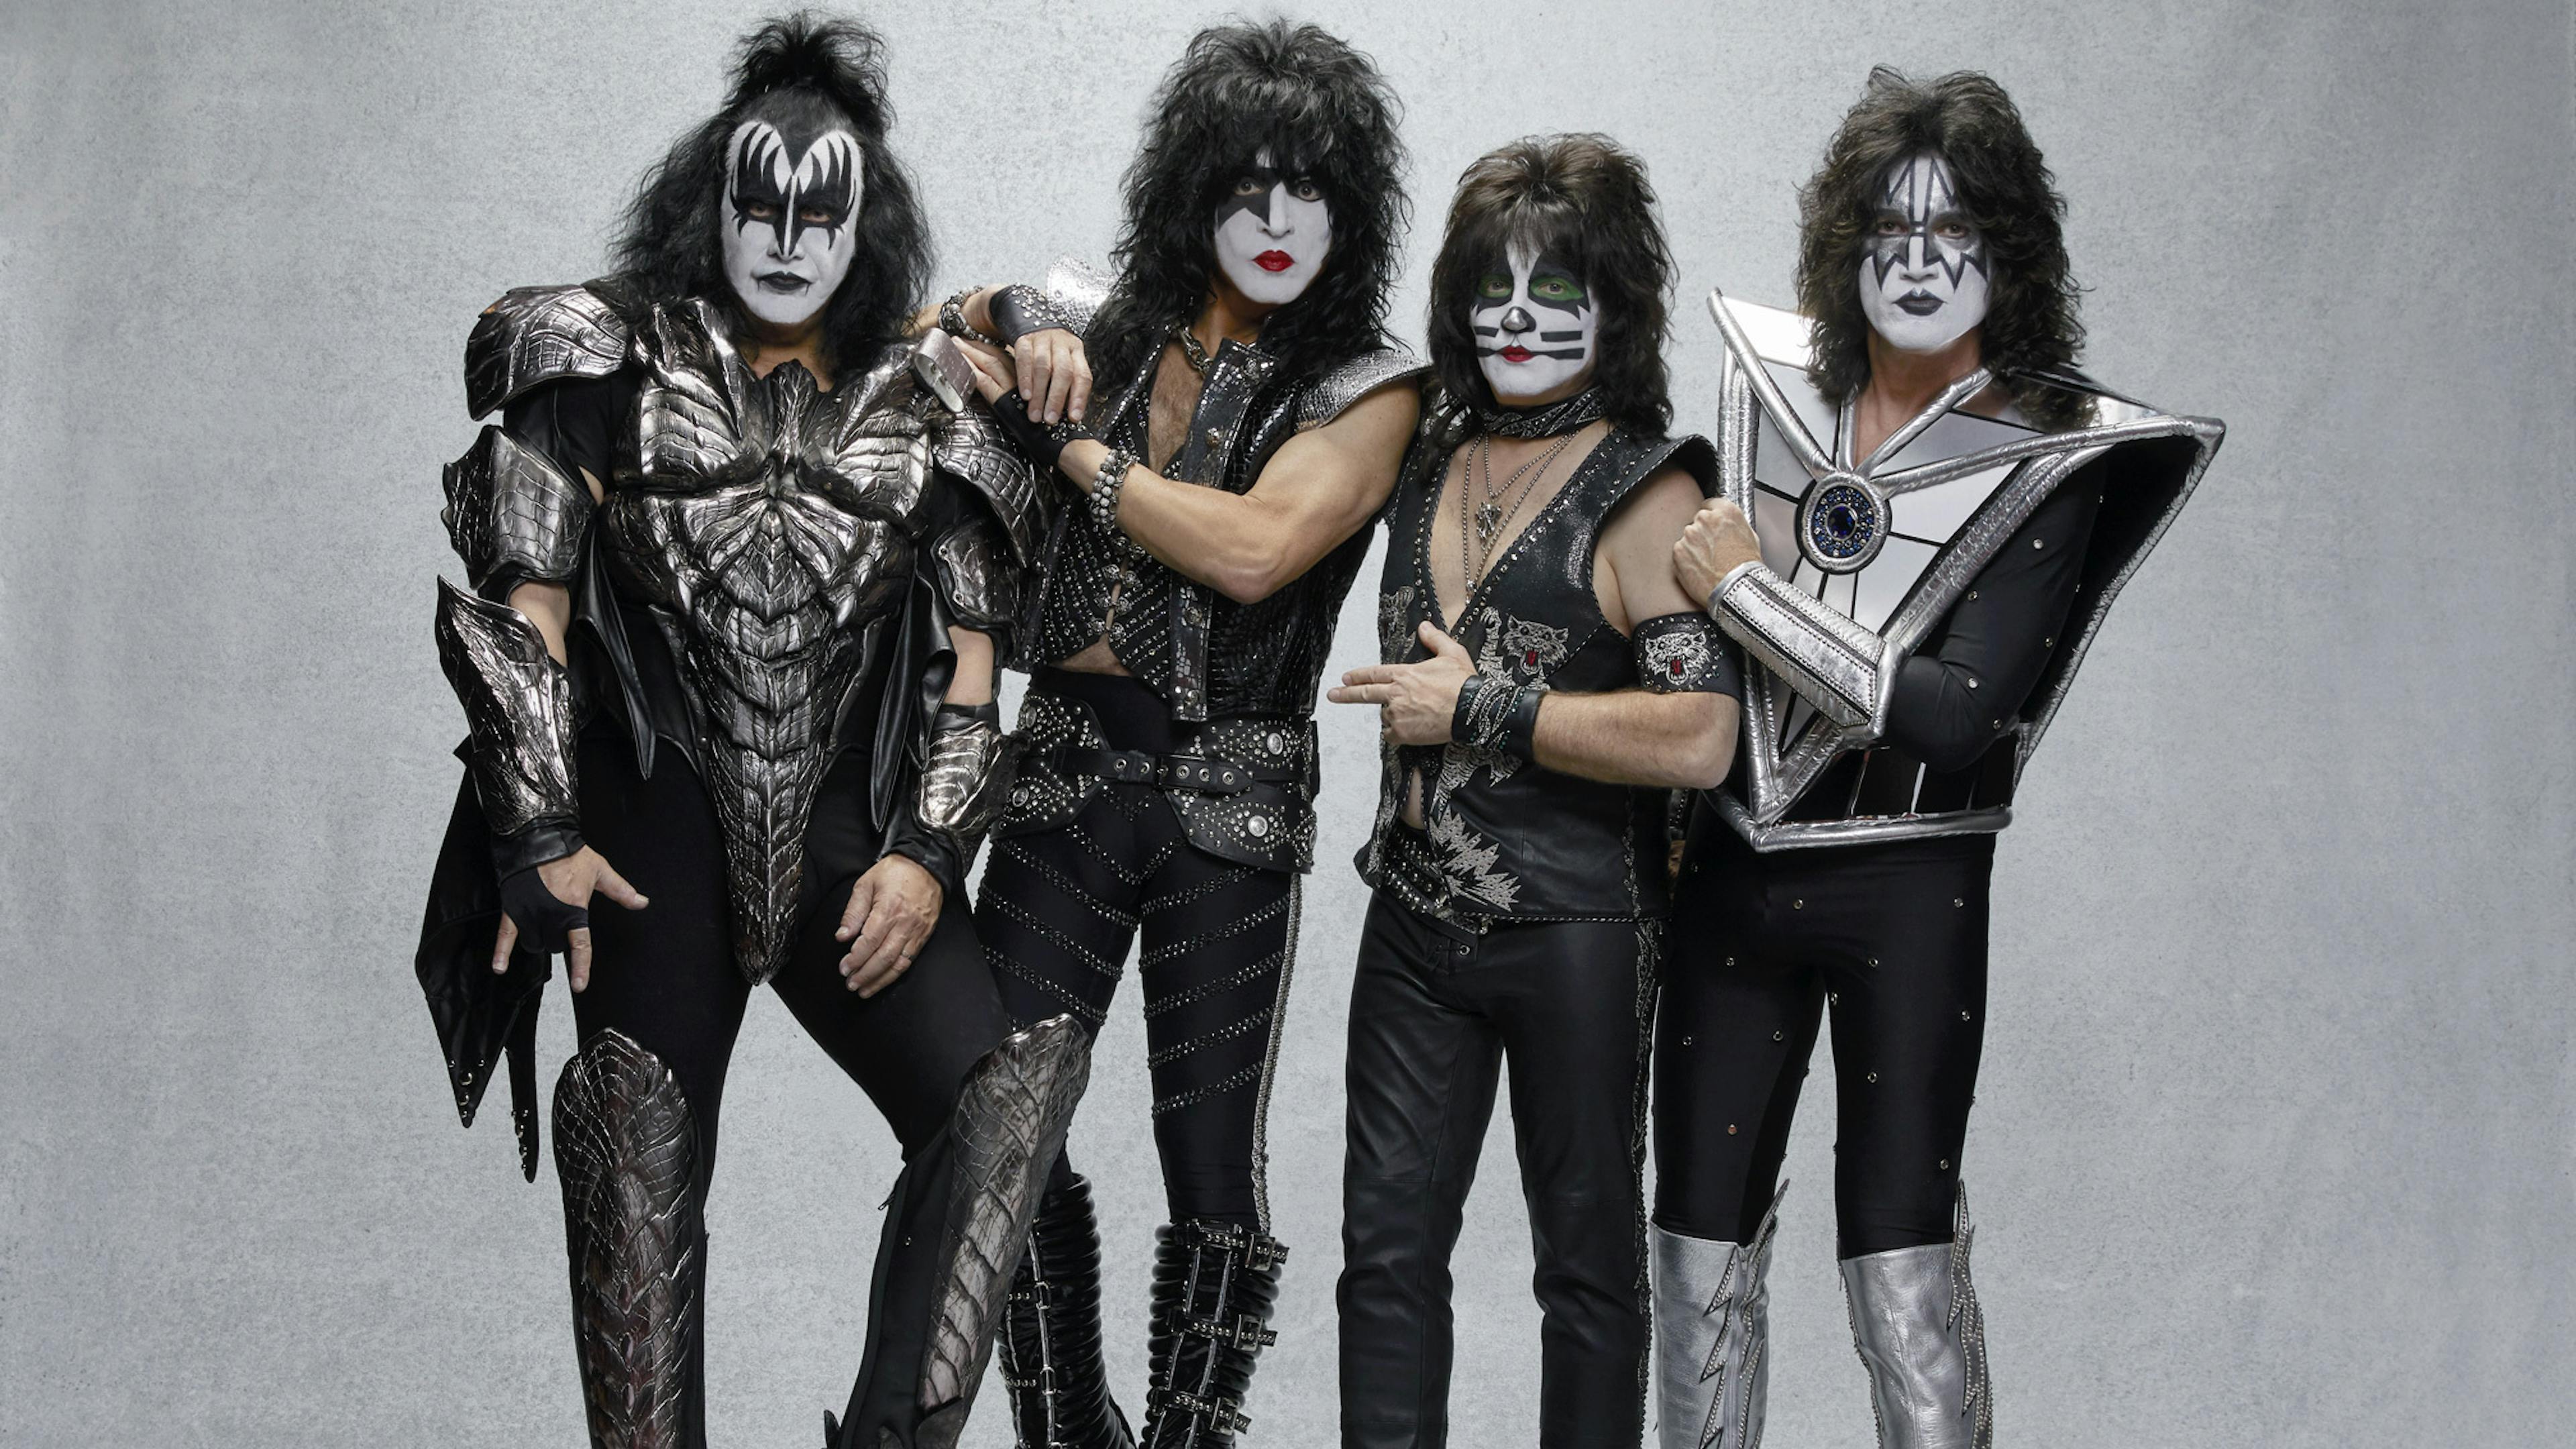 KISS' Gene Simmons says rock is dead because "the business model just doesn’t work"